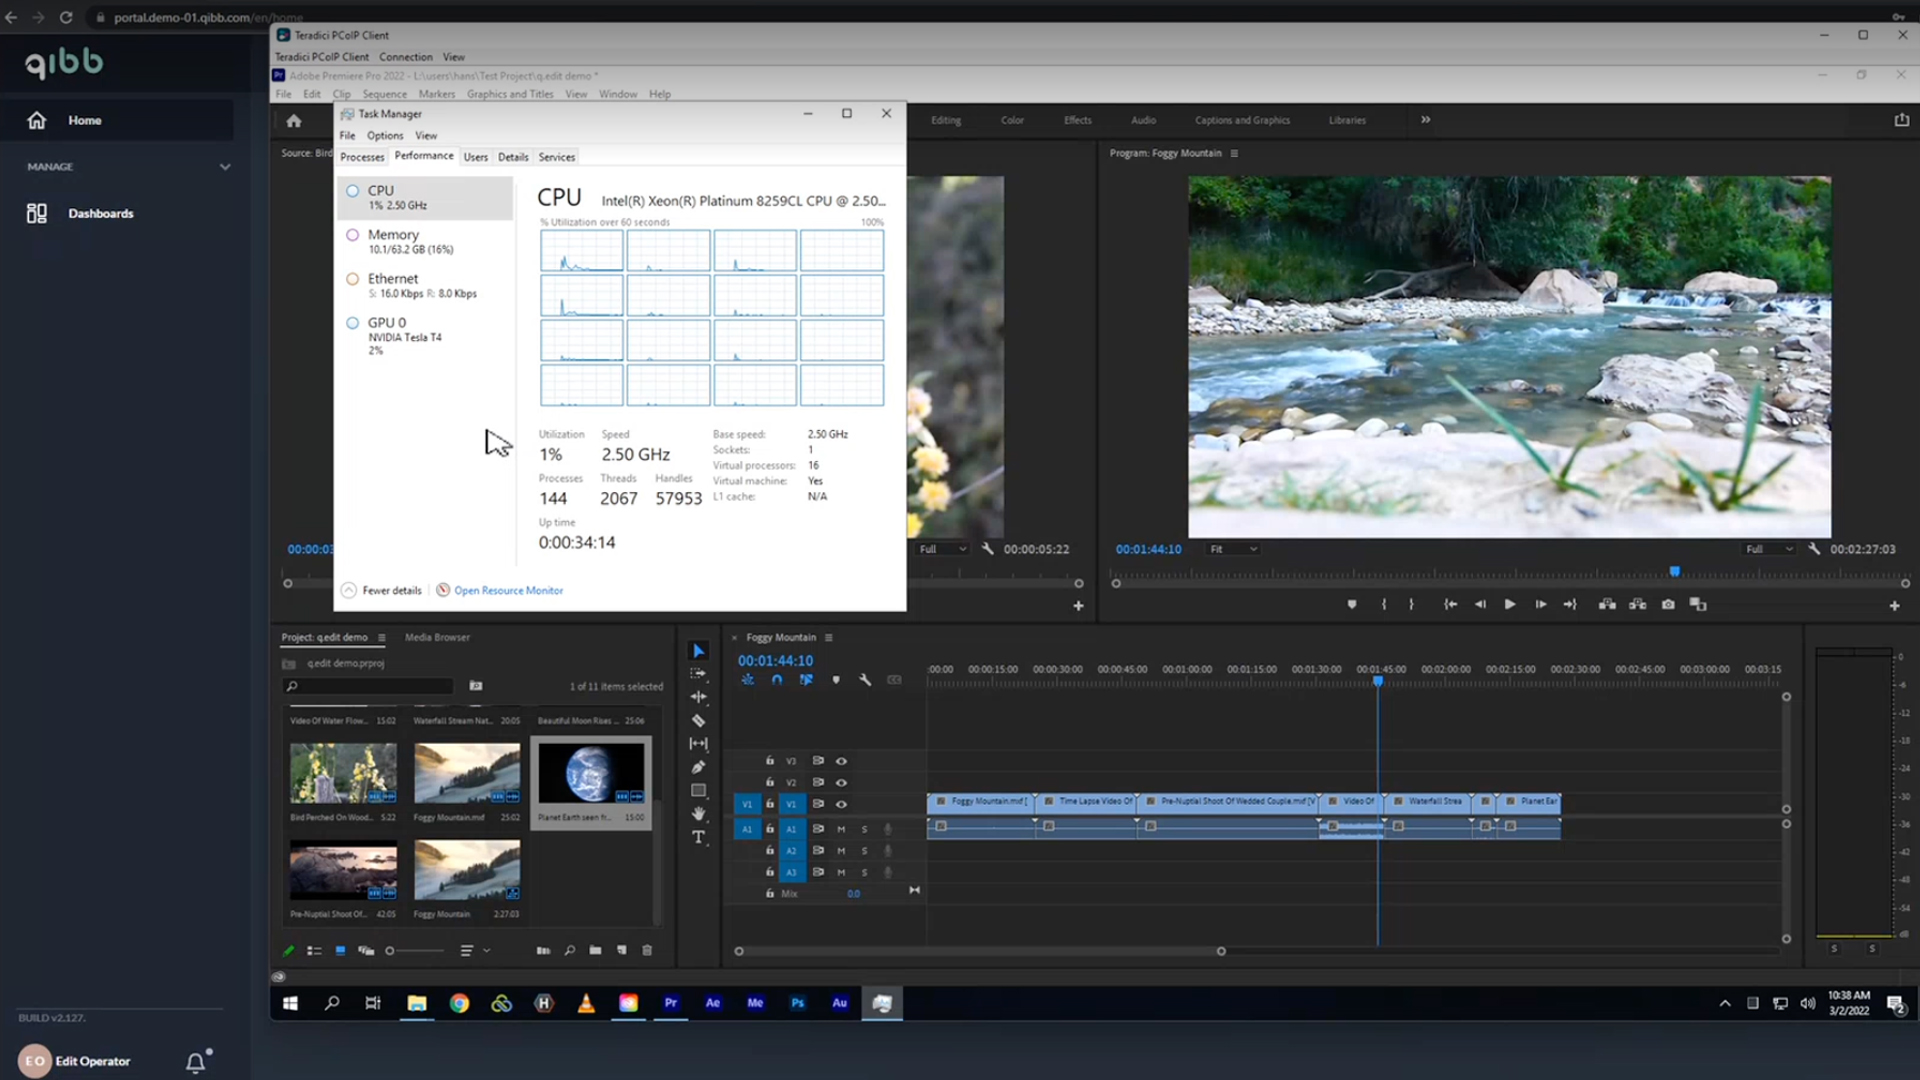 Cloud video editing workstation